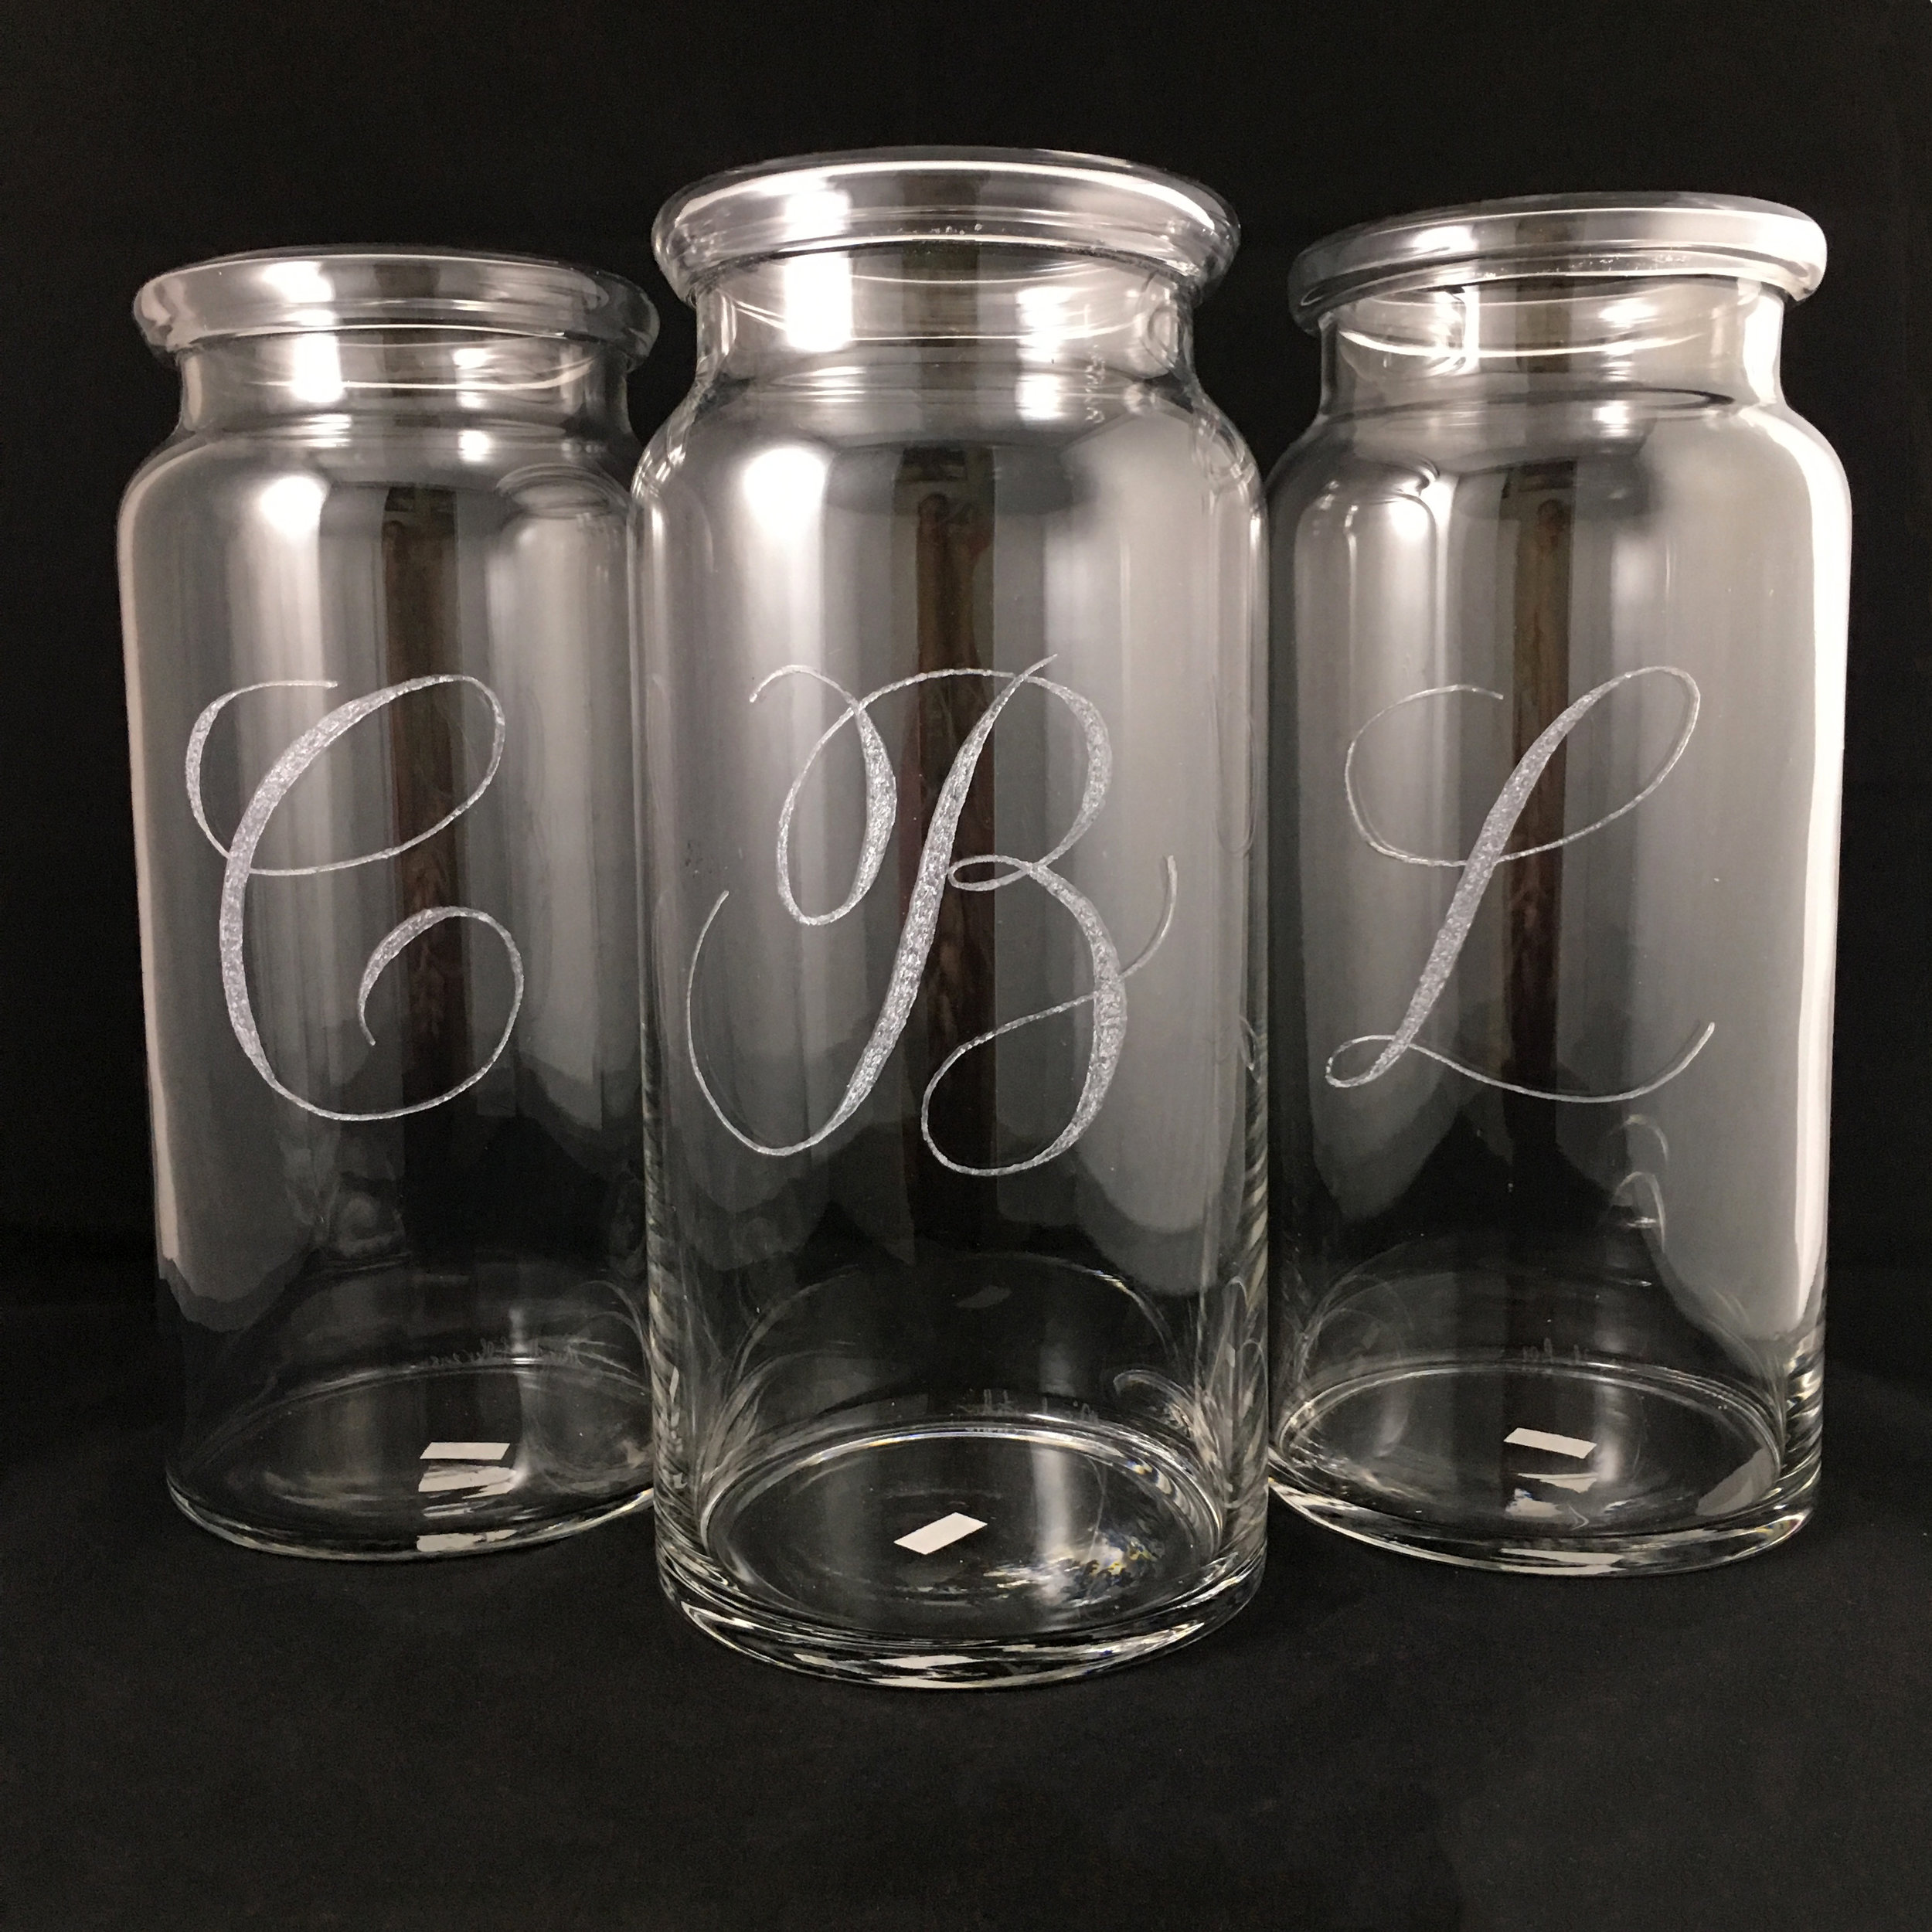 Hand Engraved Vases for Engagement Party Hostess Gifts